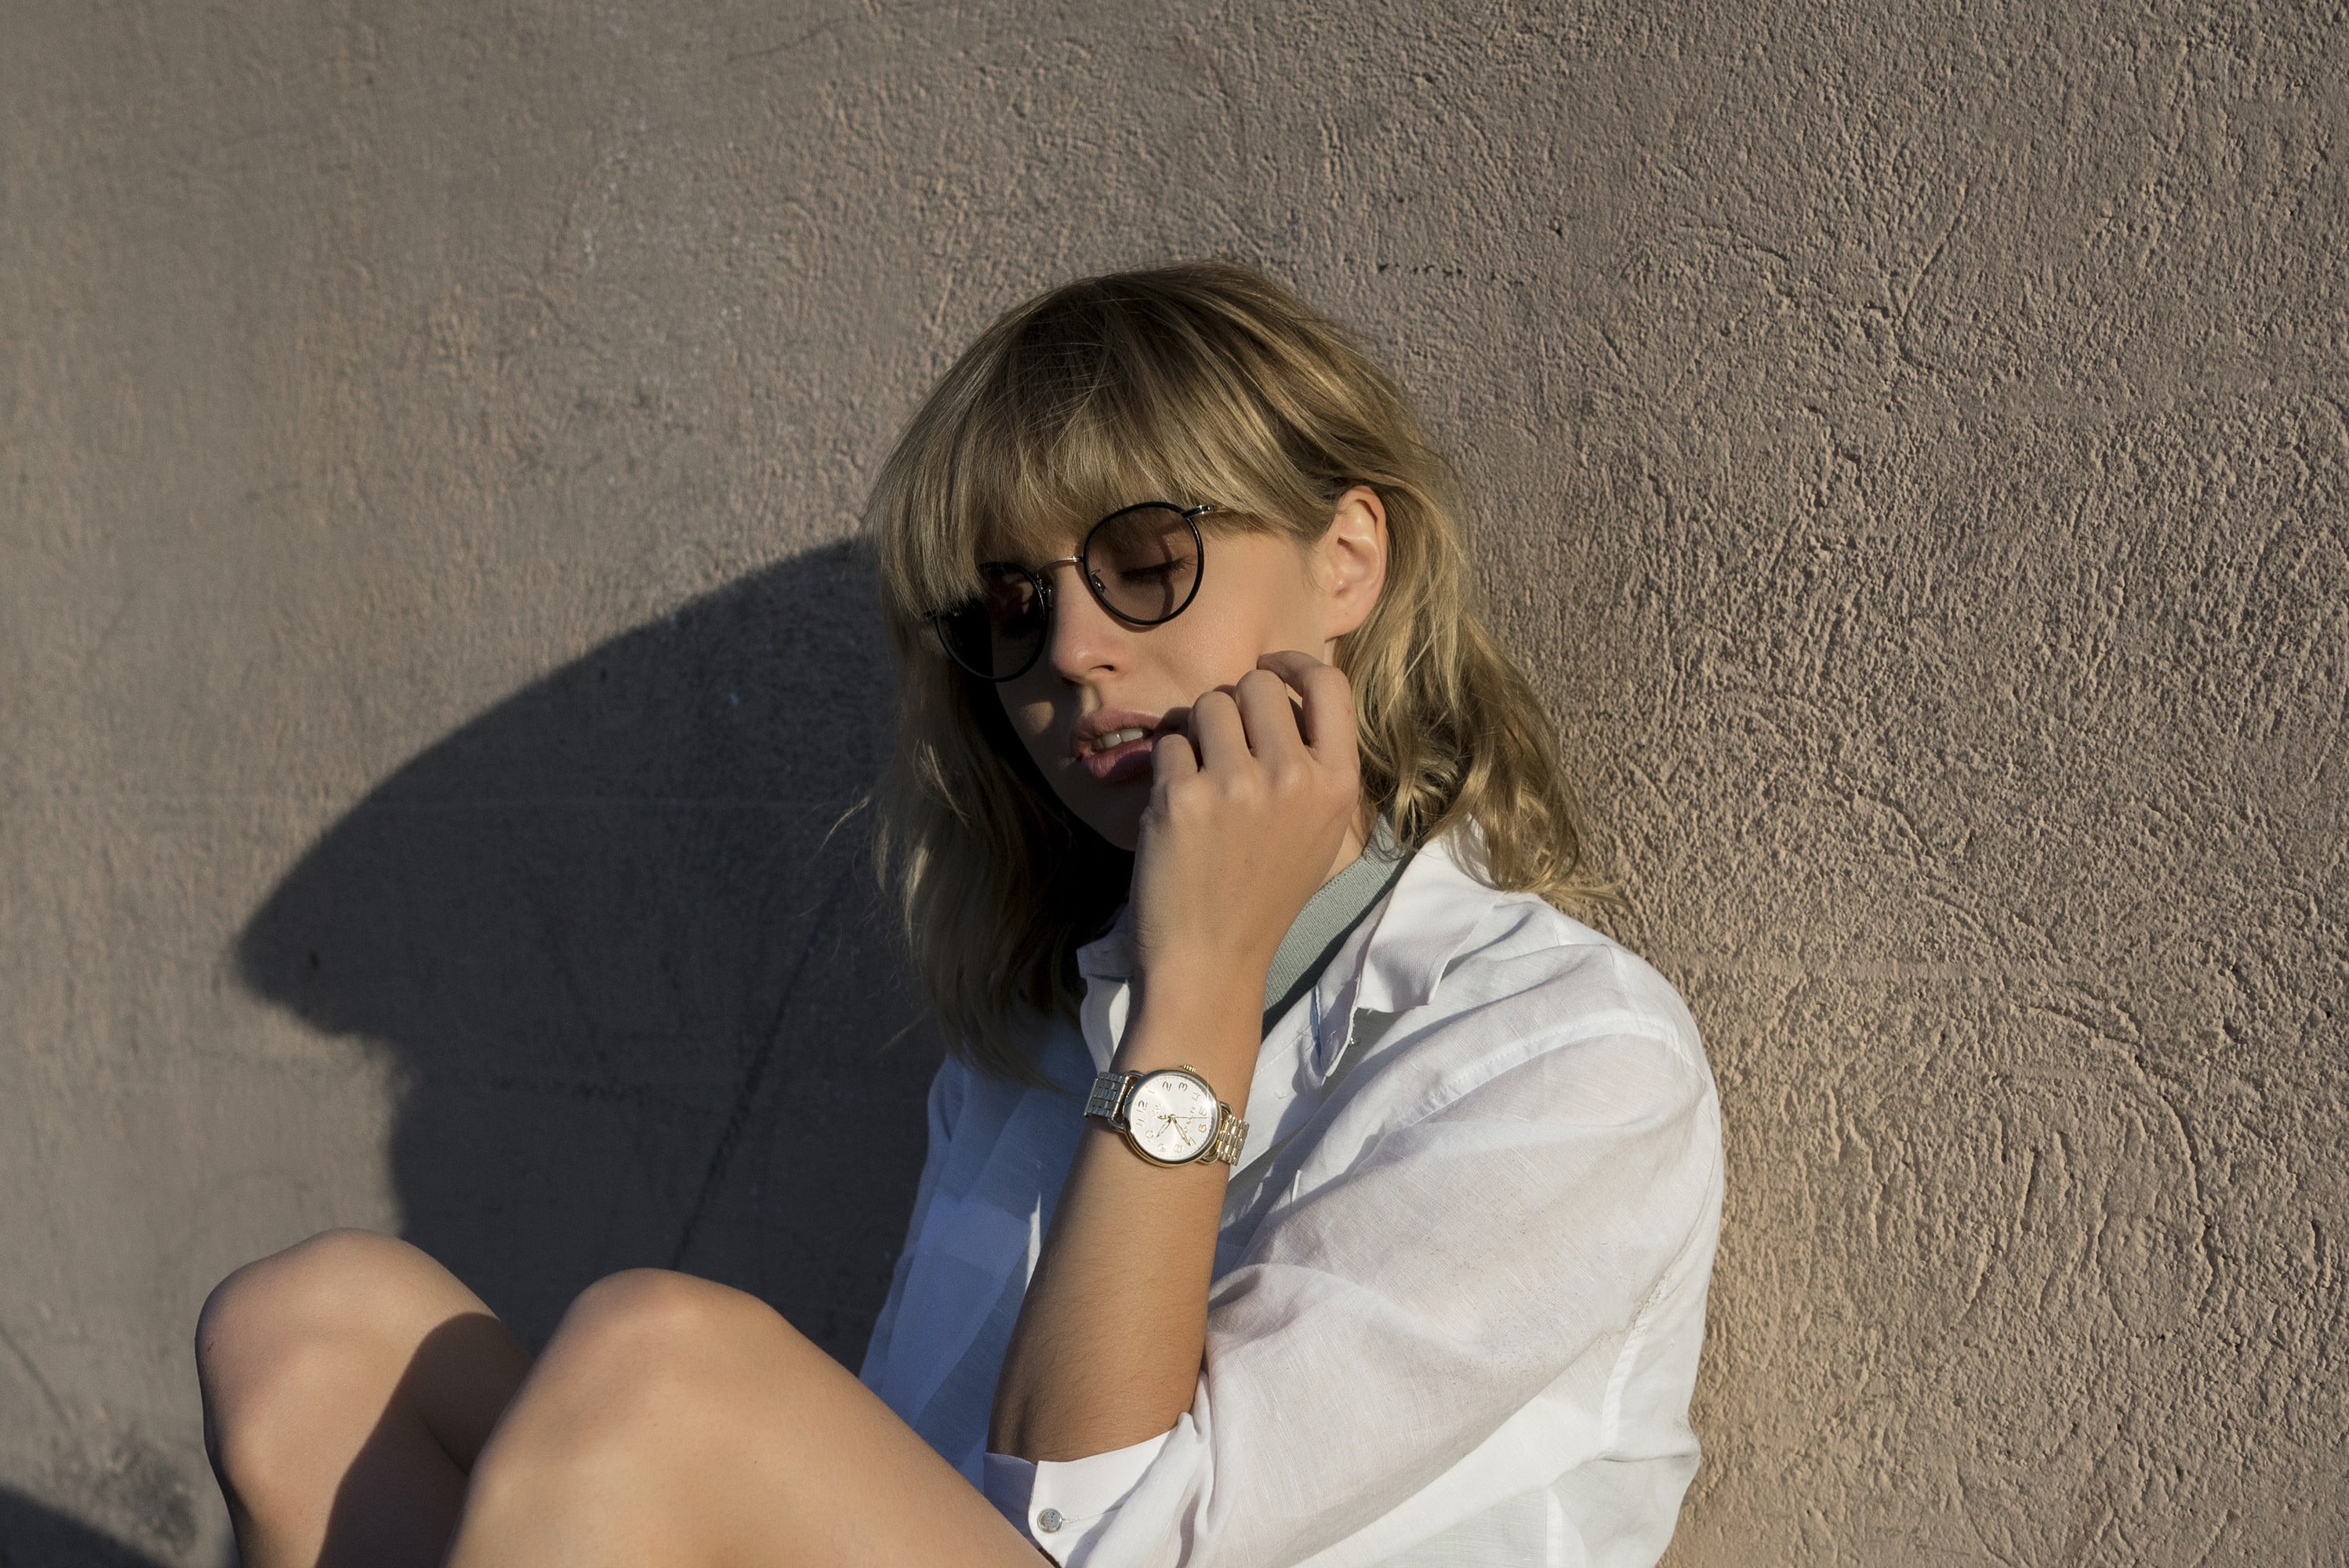 women, fashion, Lisa Dengler, glasses, one person, real people